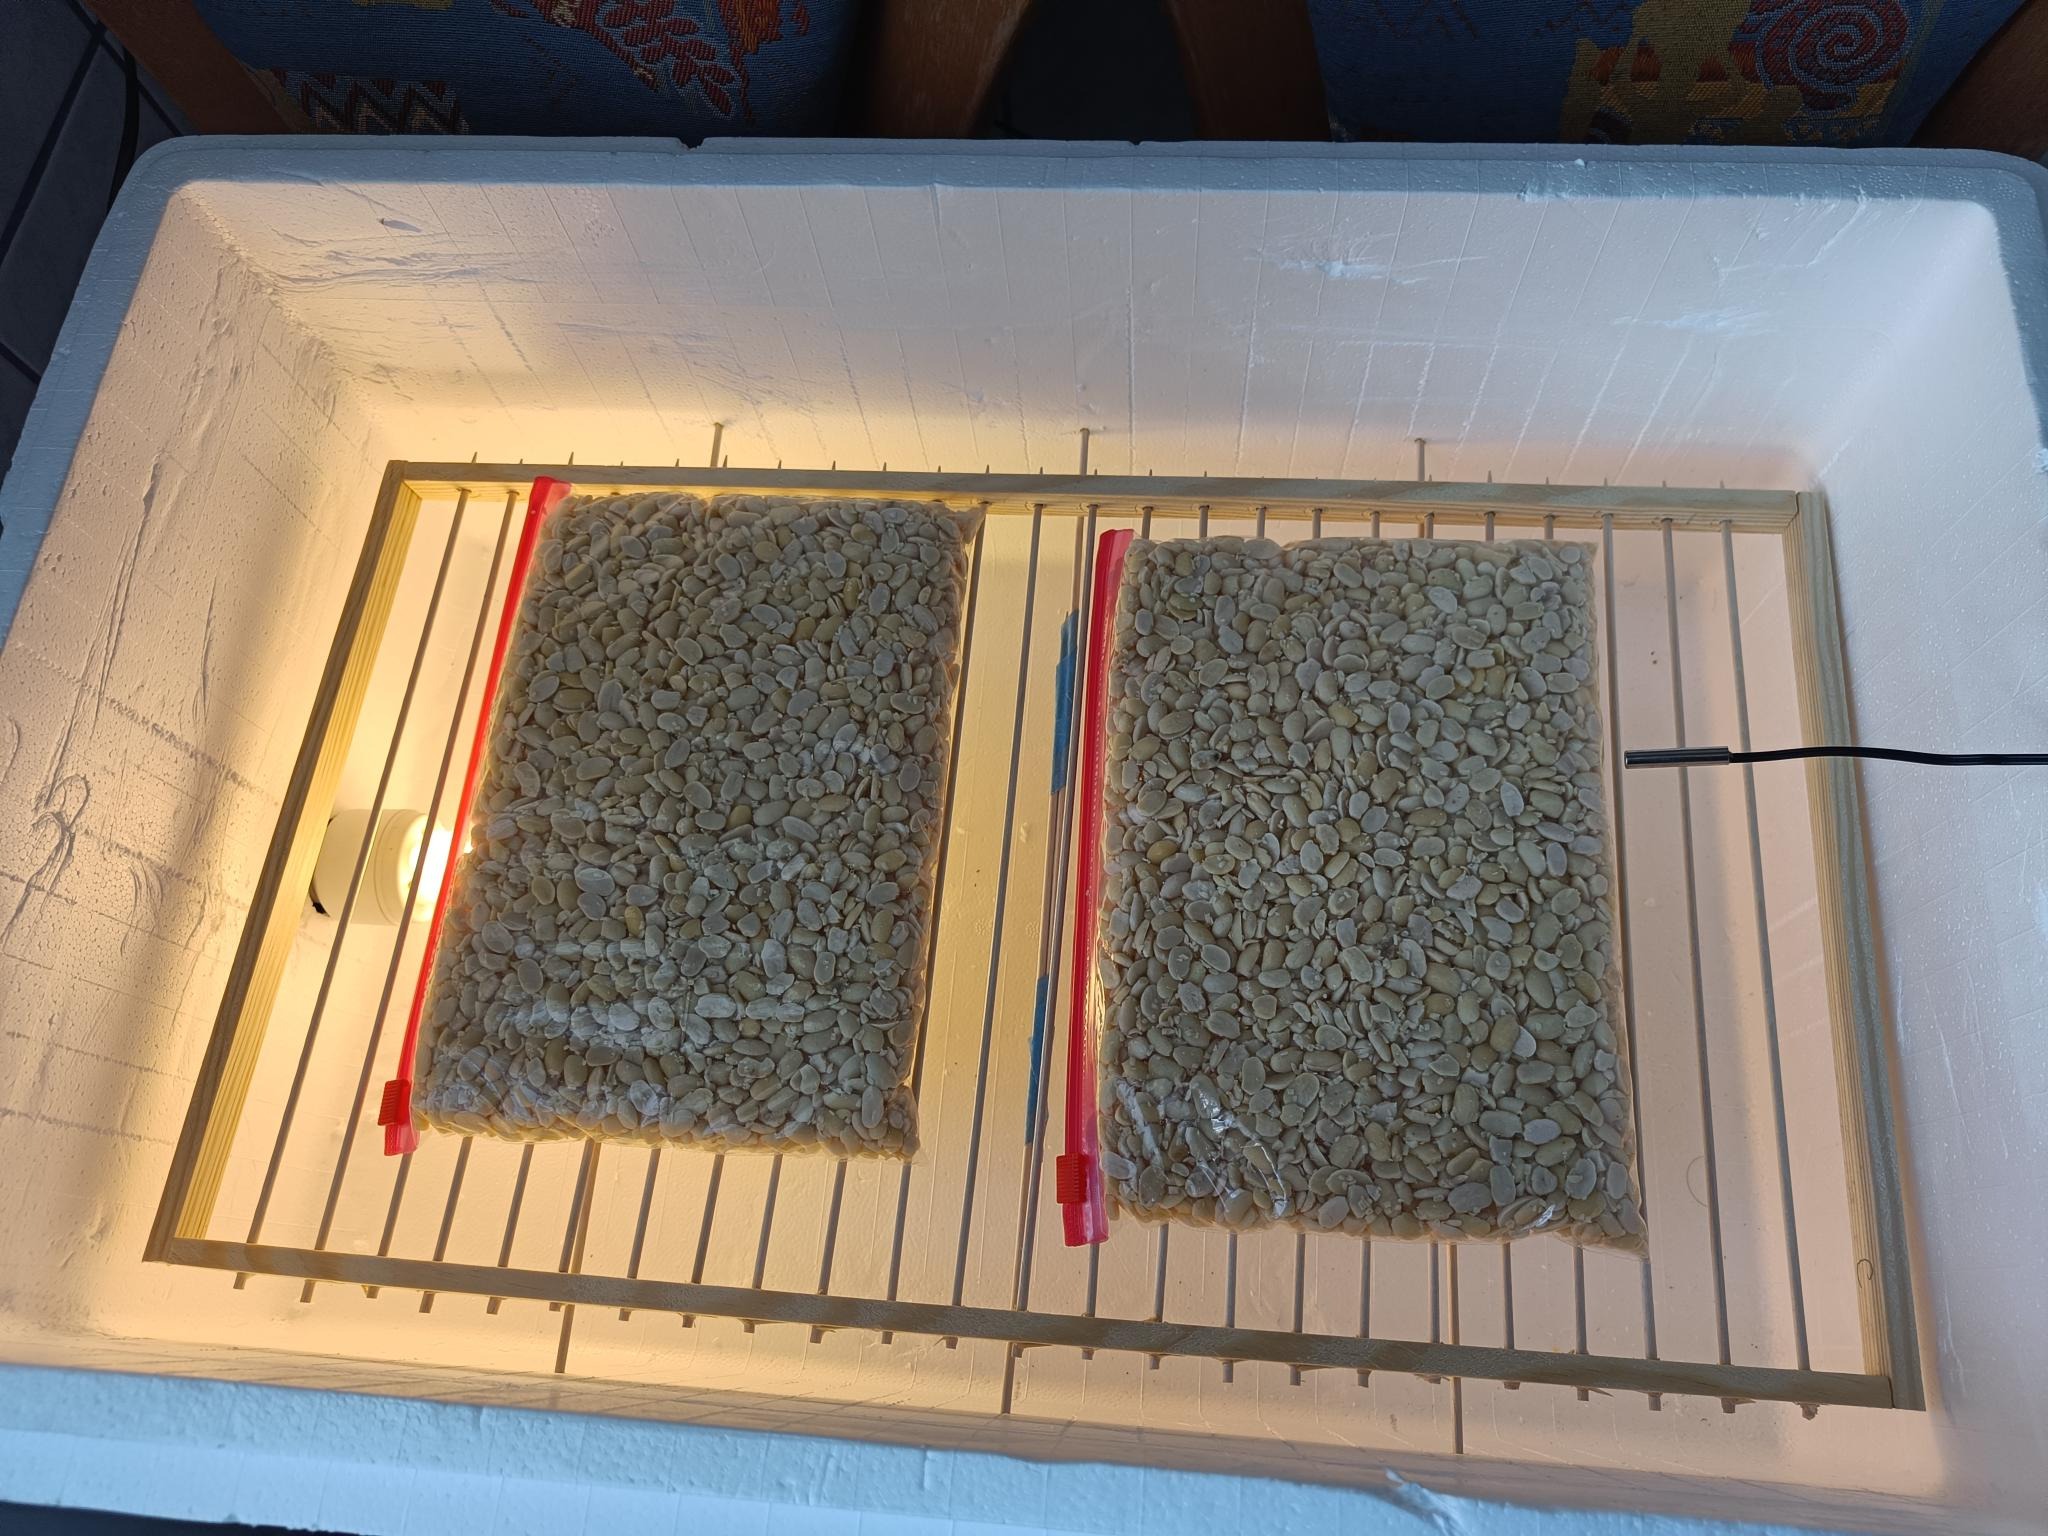 same incubator box with beans on shelf and light on